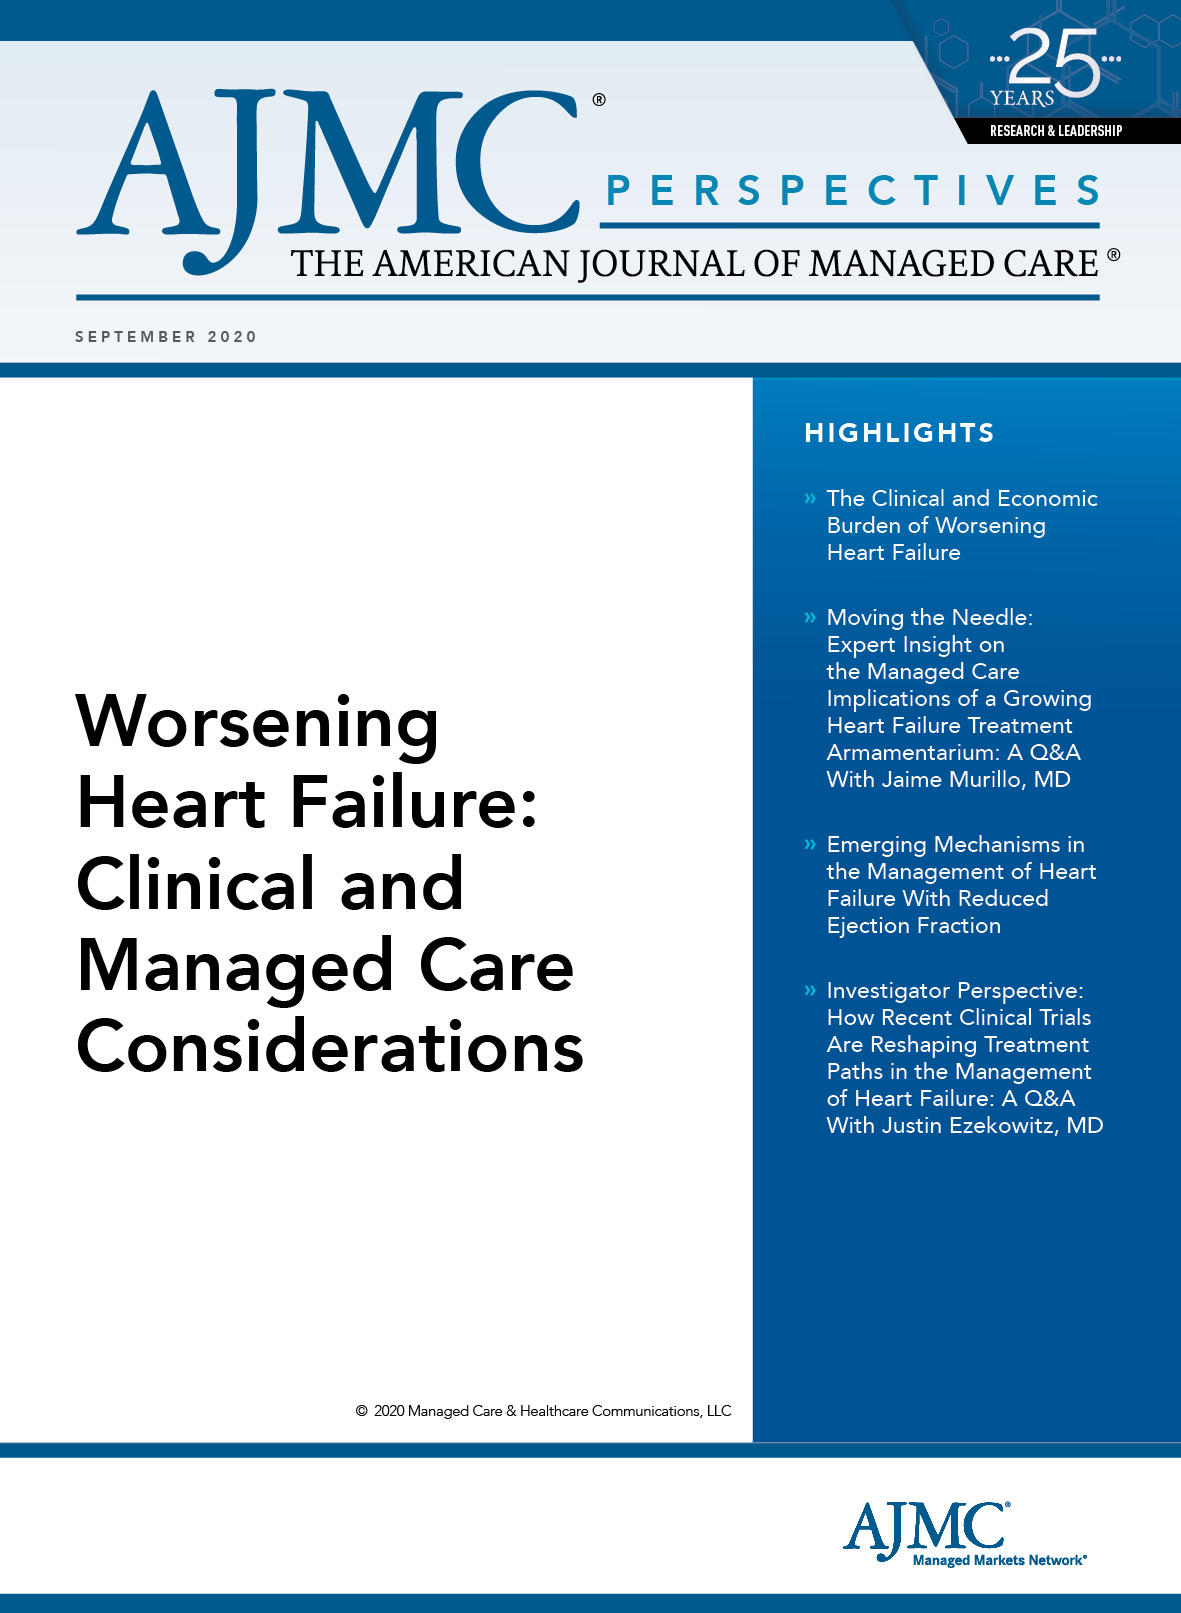 Worsening Heart Failure: Clinical and Managed Care Considerations